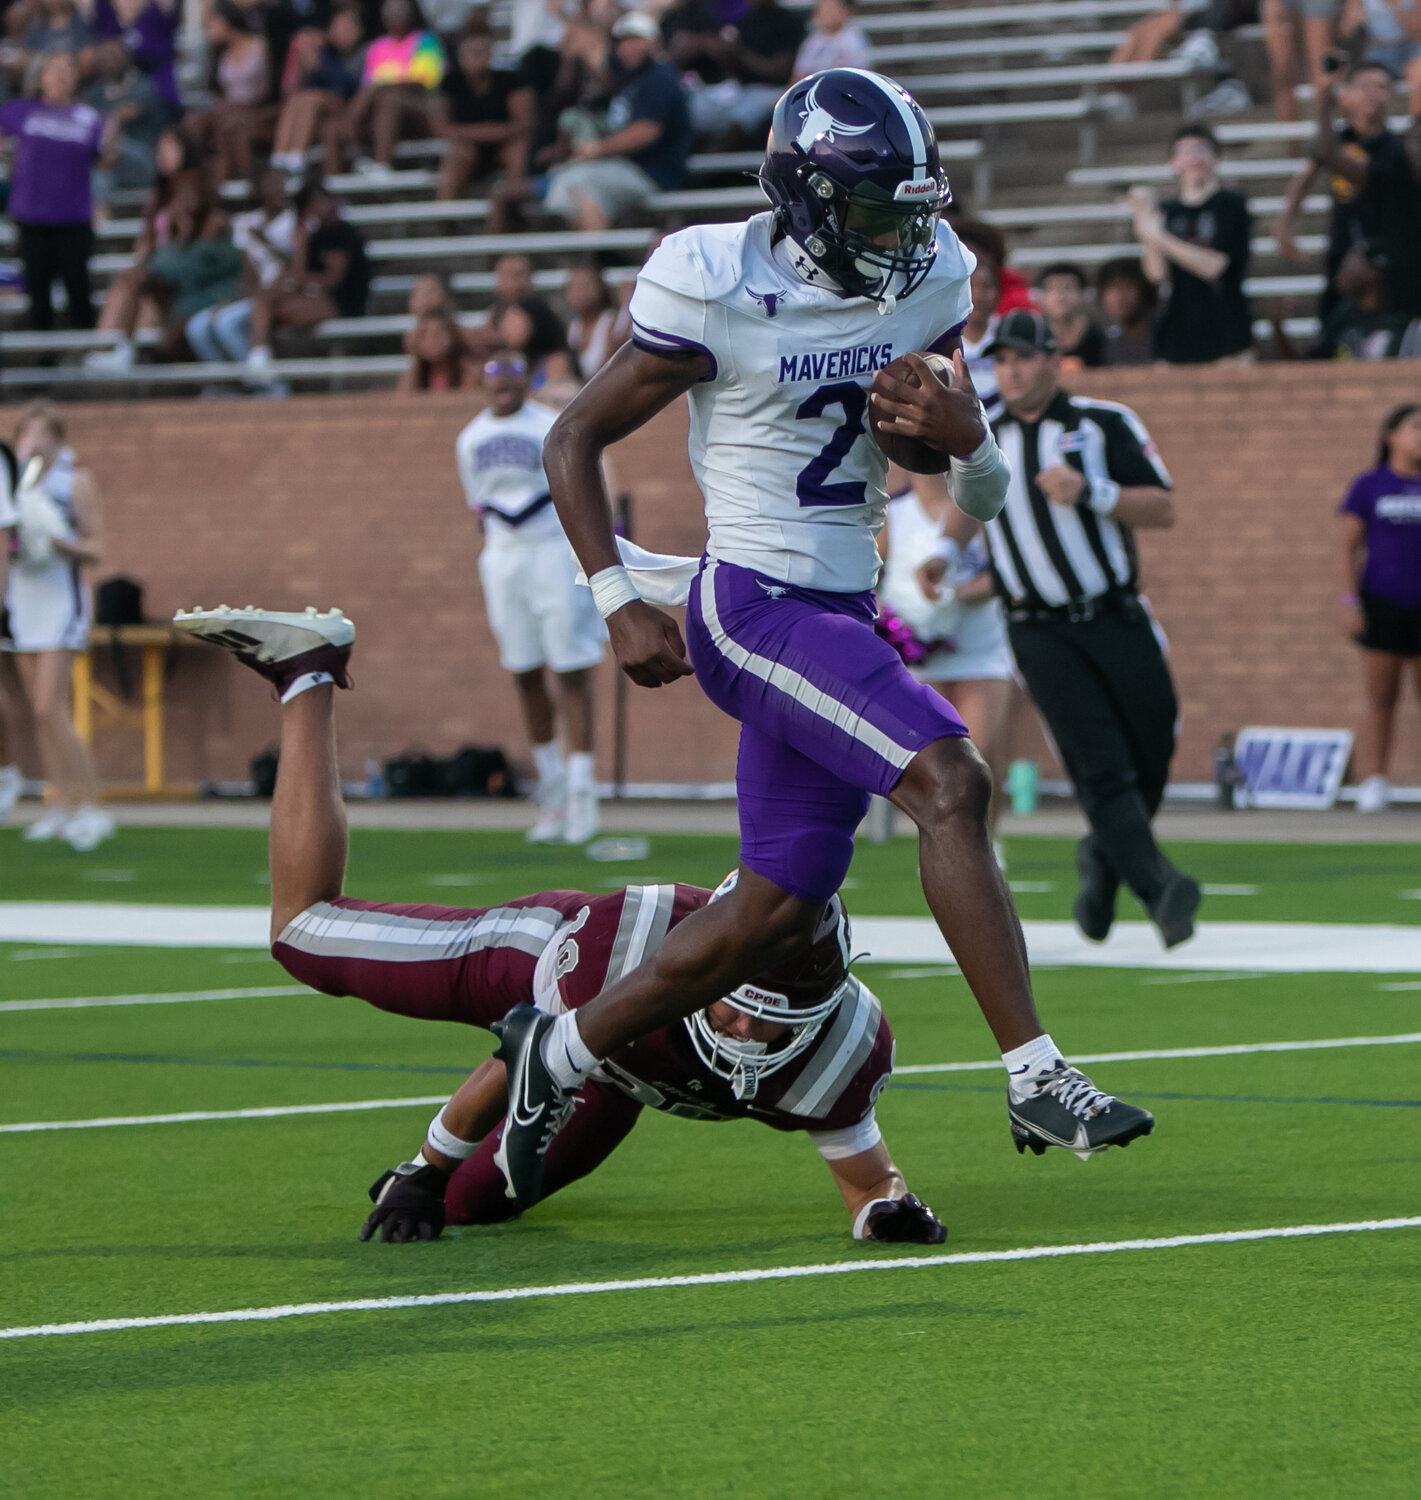 Mike Gerald runs into the endzone during Friday's District 19-6A game between Cinco Ranch and Morton Ranch on Friday at Rhodes Stadium.